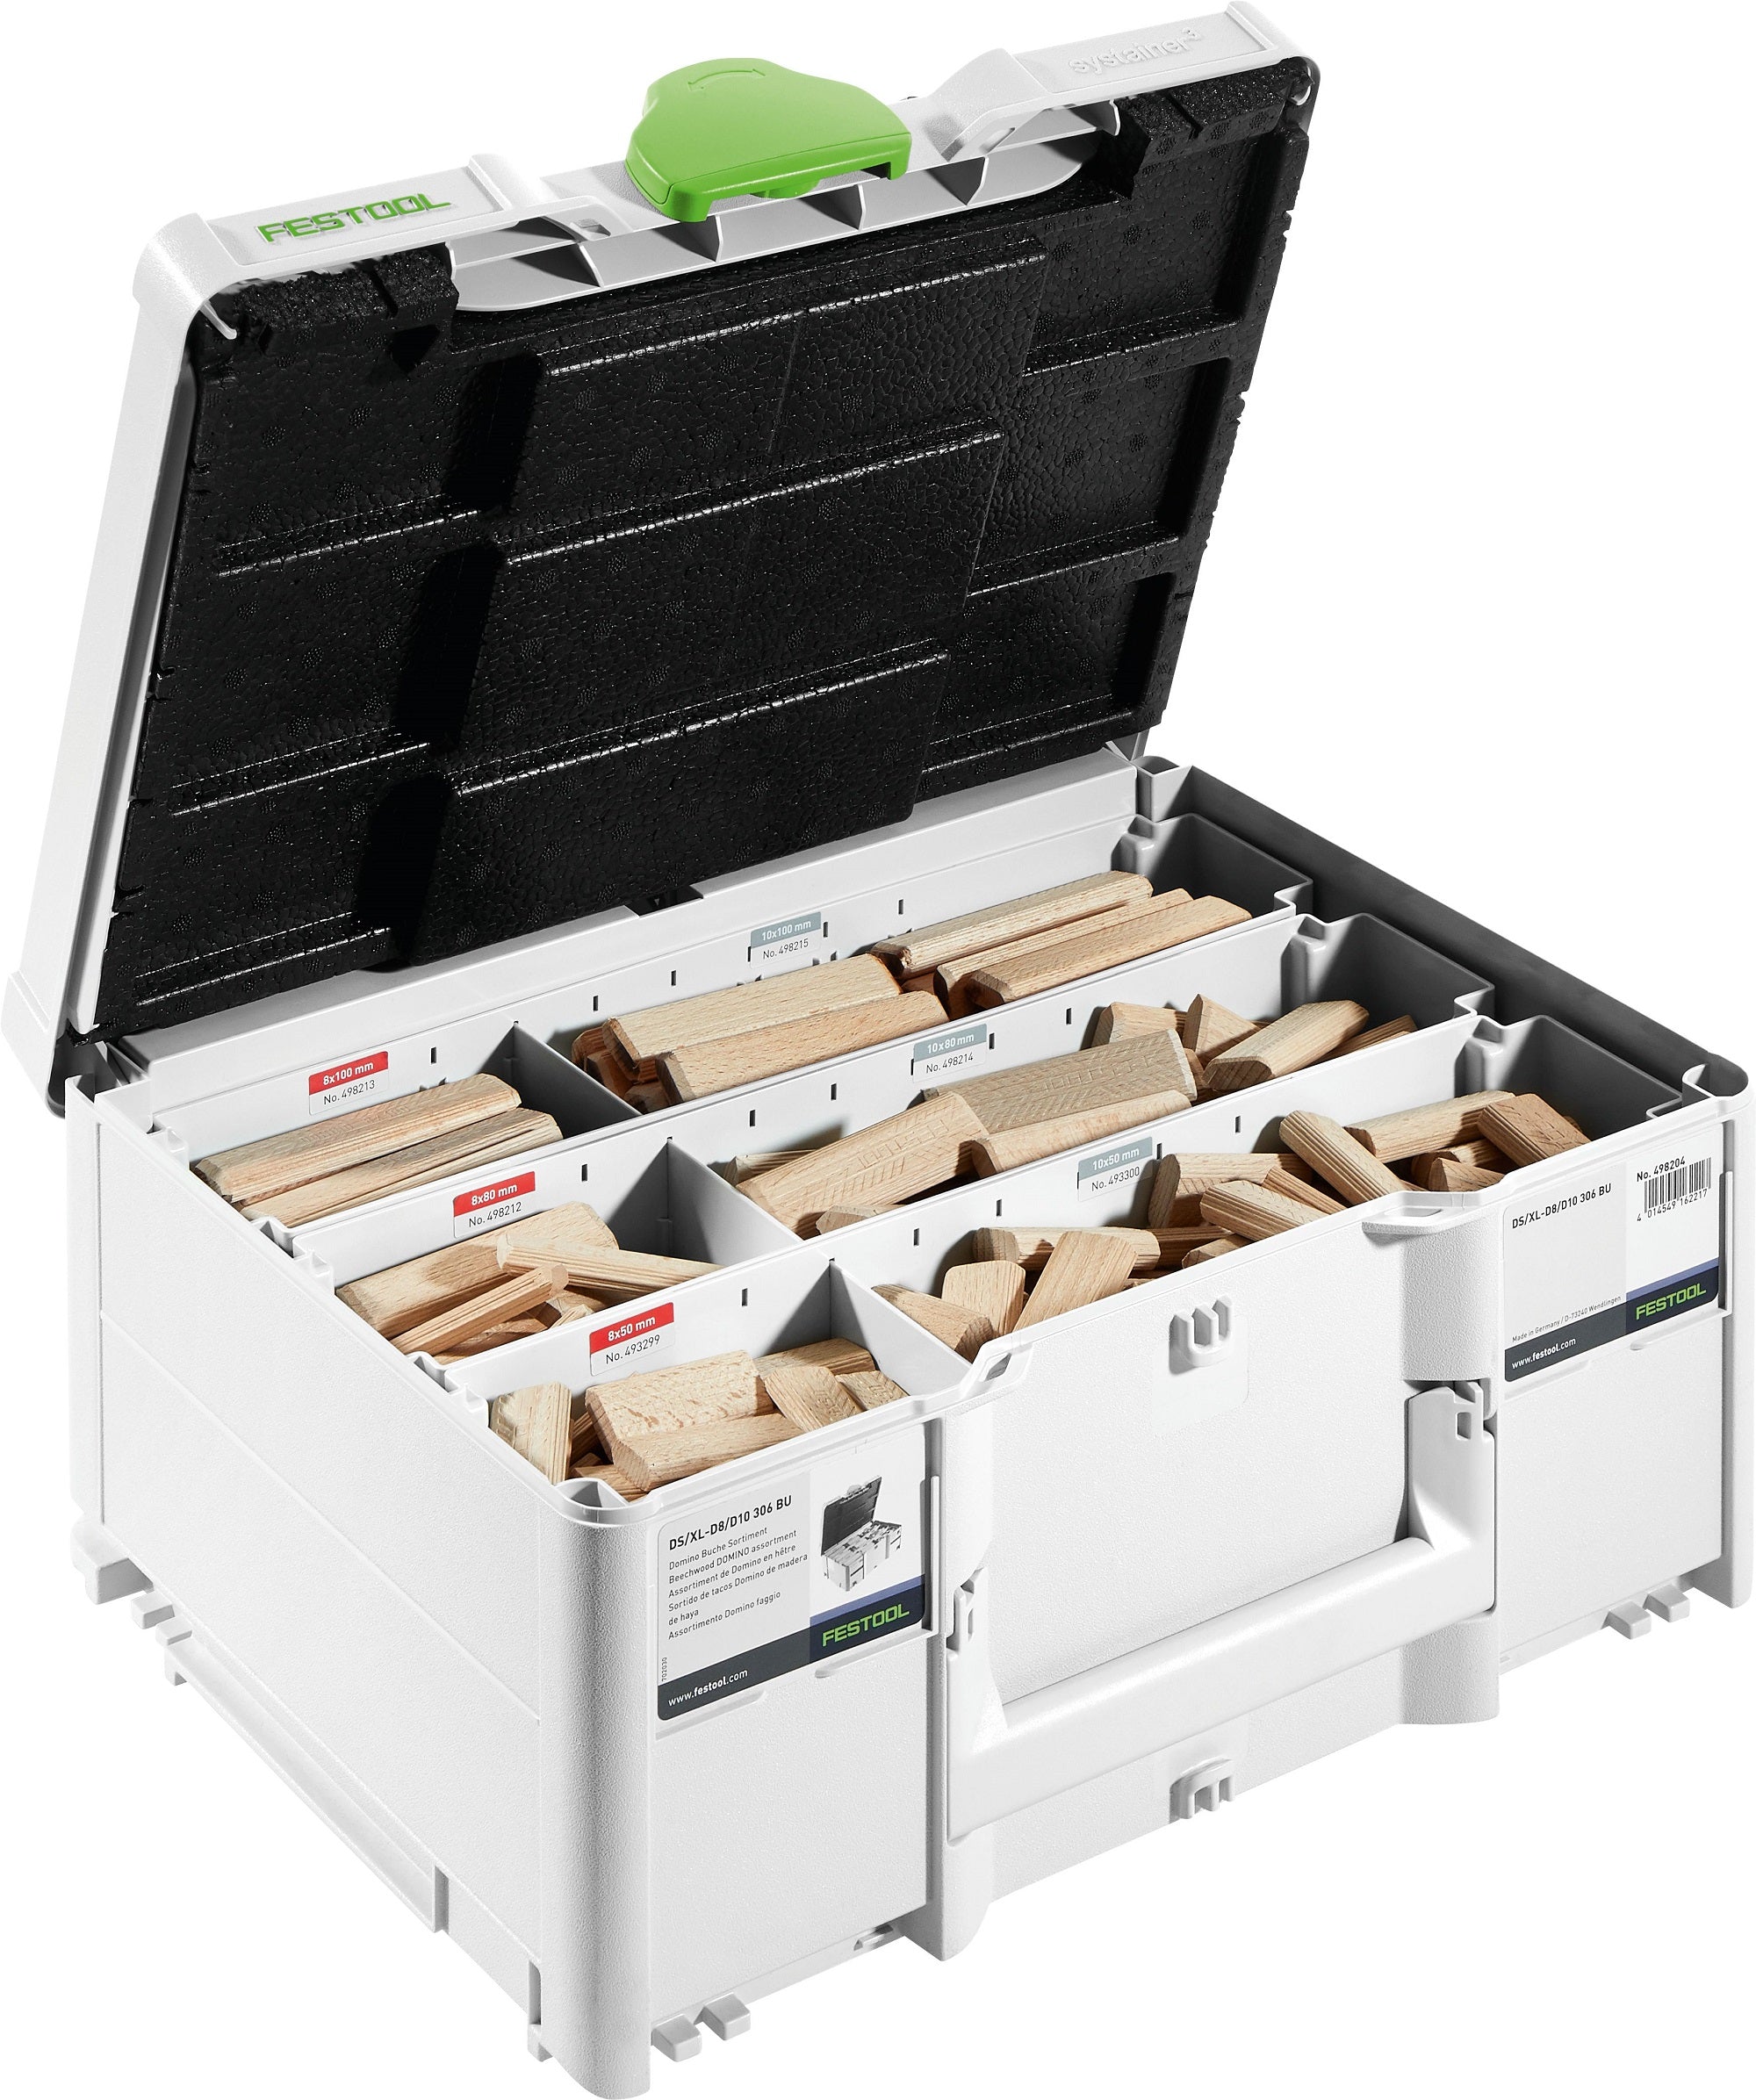 Festool 576792 Domino XL Assortment with Systainer³, 12mm / 14mm